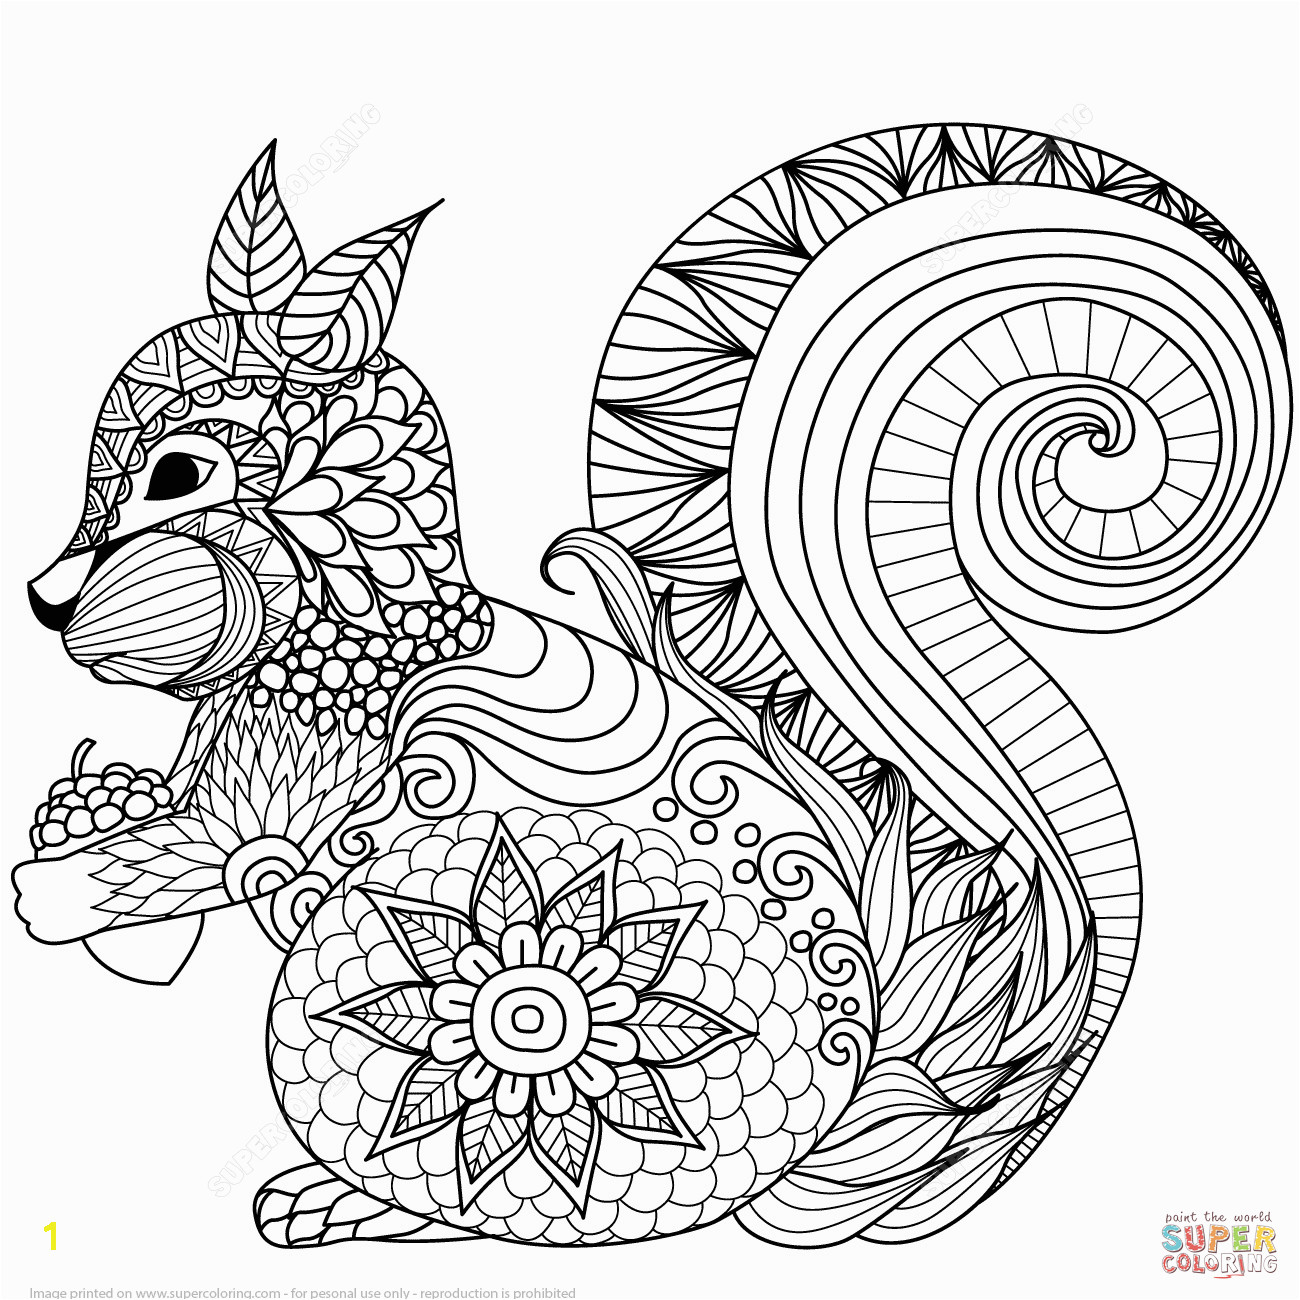 Lovely Squirrel Zentangle coloring page